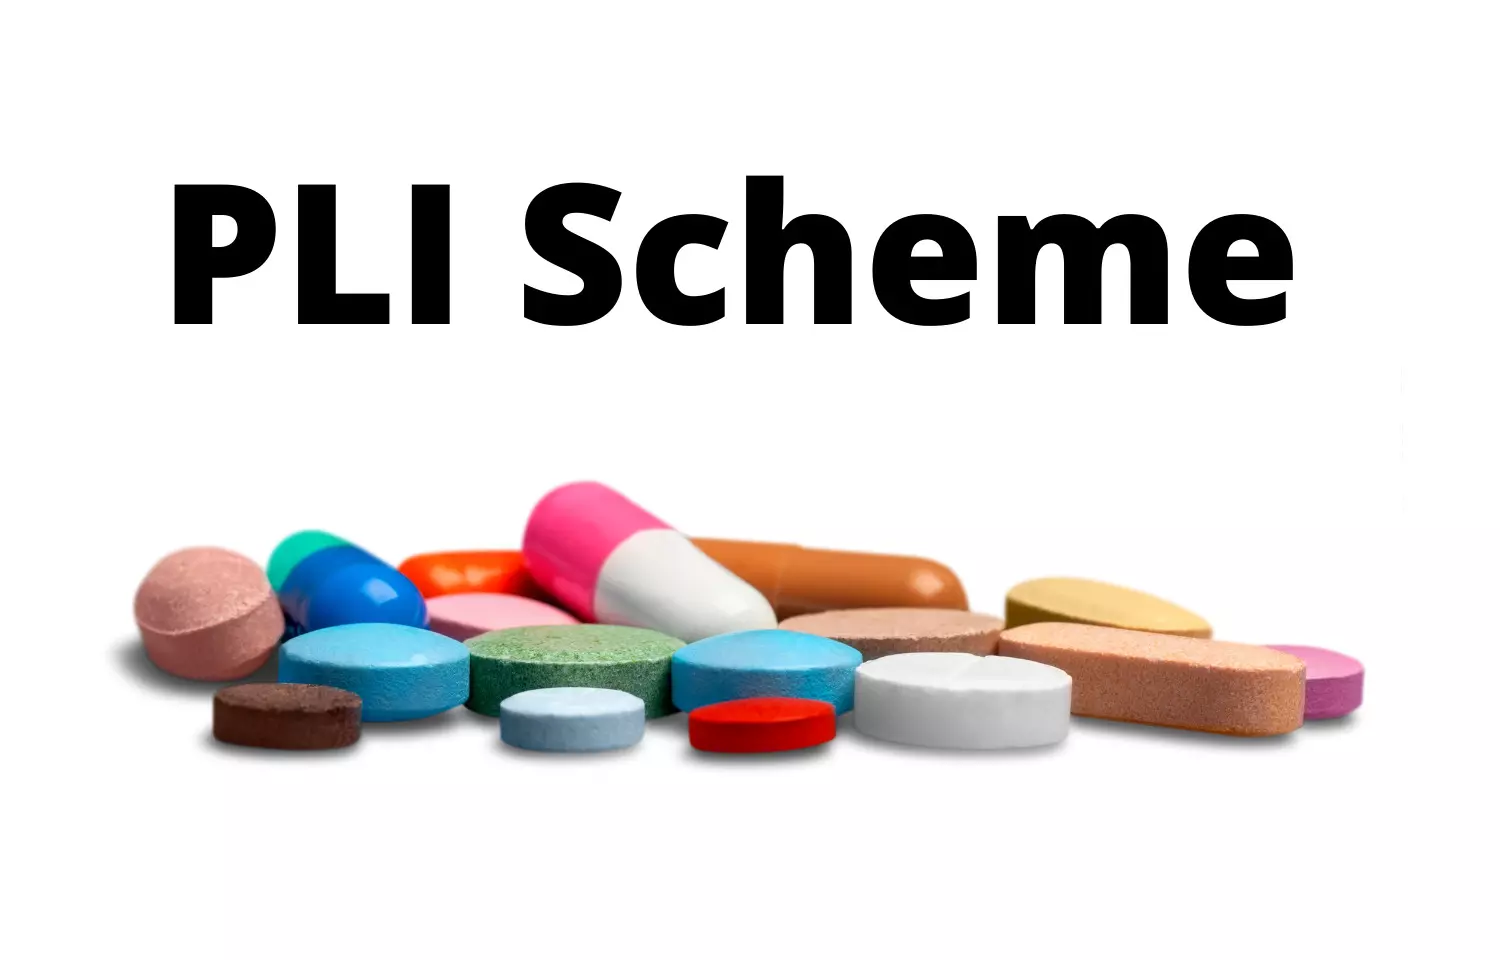 Union Health Minister says PLI scheme boosts production of over 35 products in India